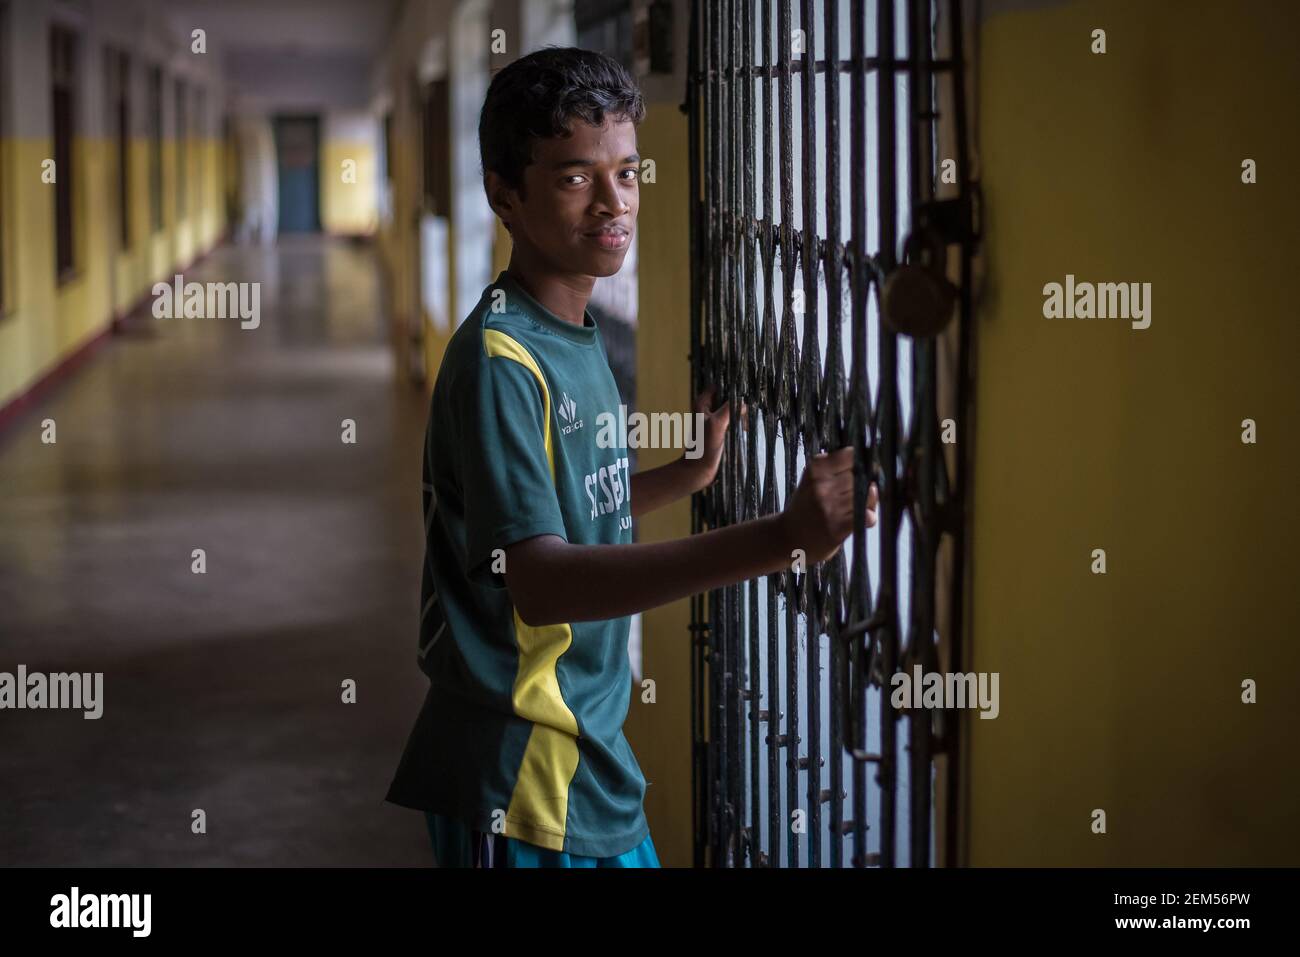 Rajasthan. India. 07-02-2018. Portrait of a male adolescent after finishing his lunch at school. Stock Photo